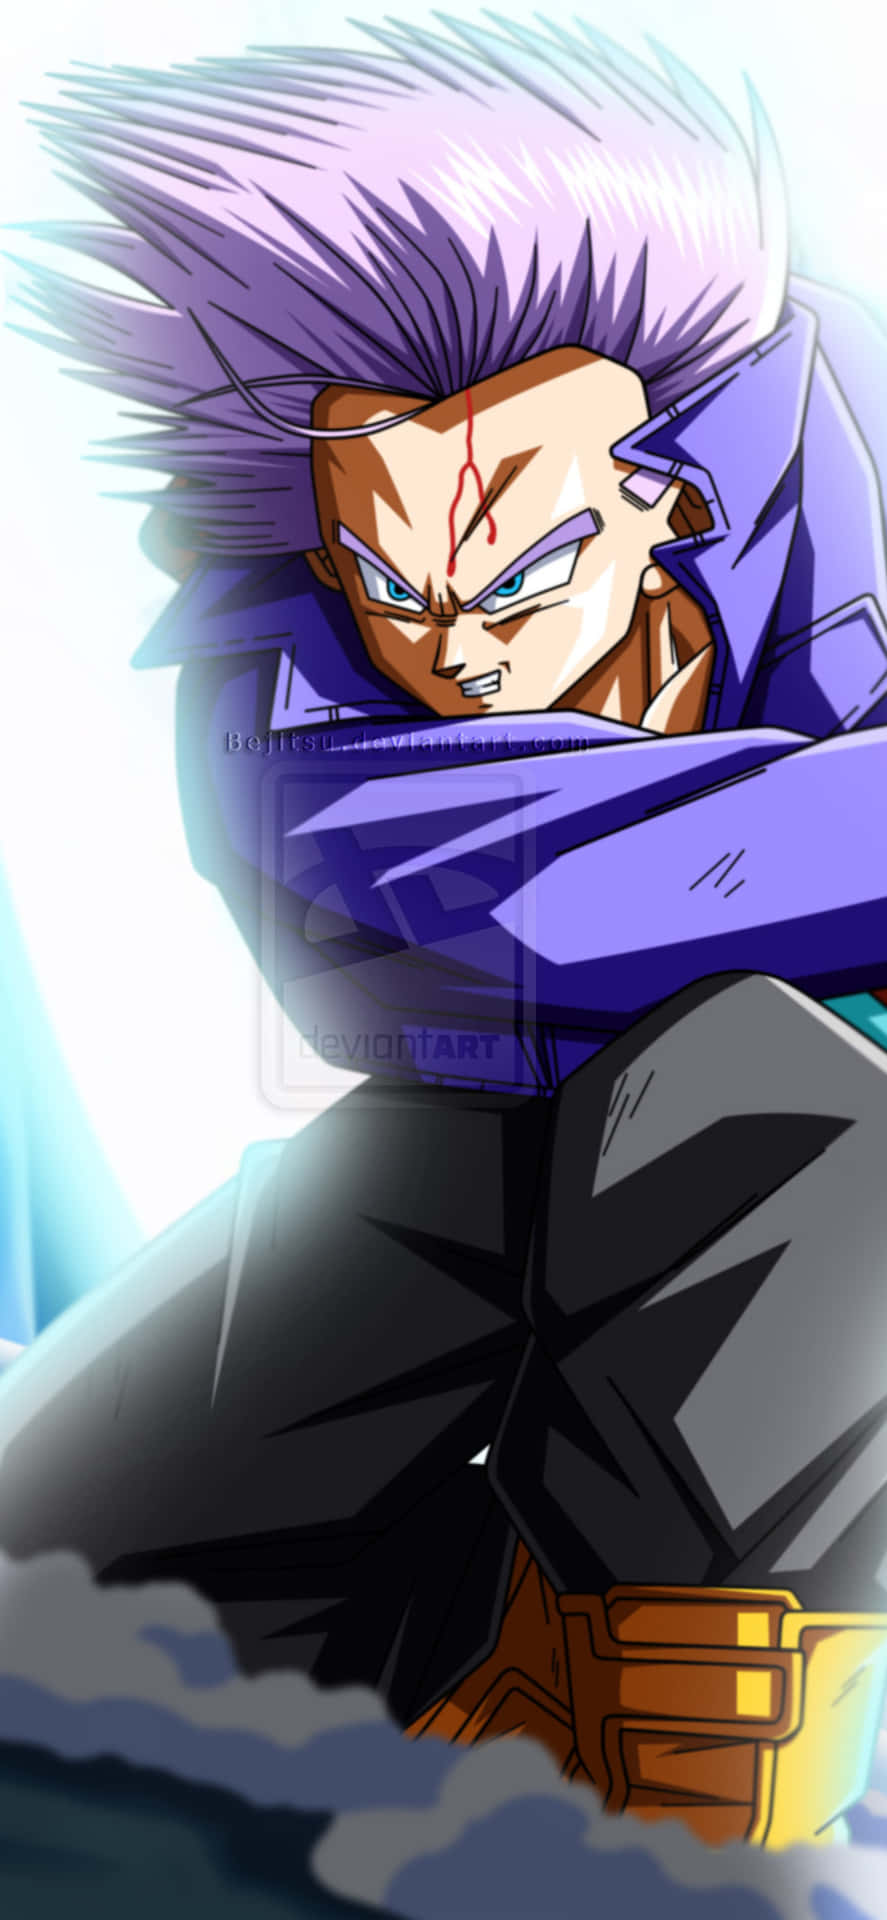 "Trunks Ready to Take On Any Battle" Wallpaper